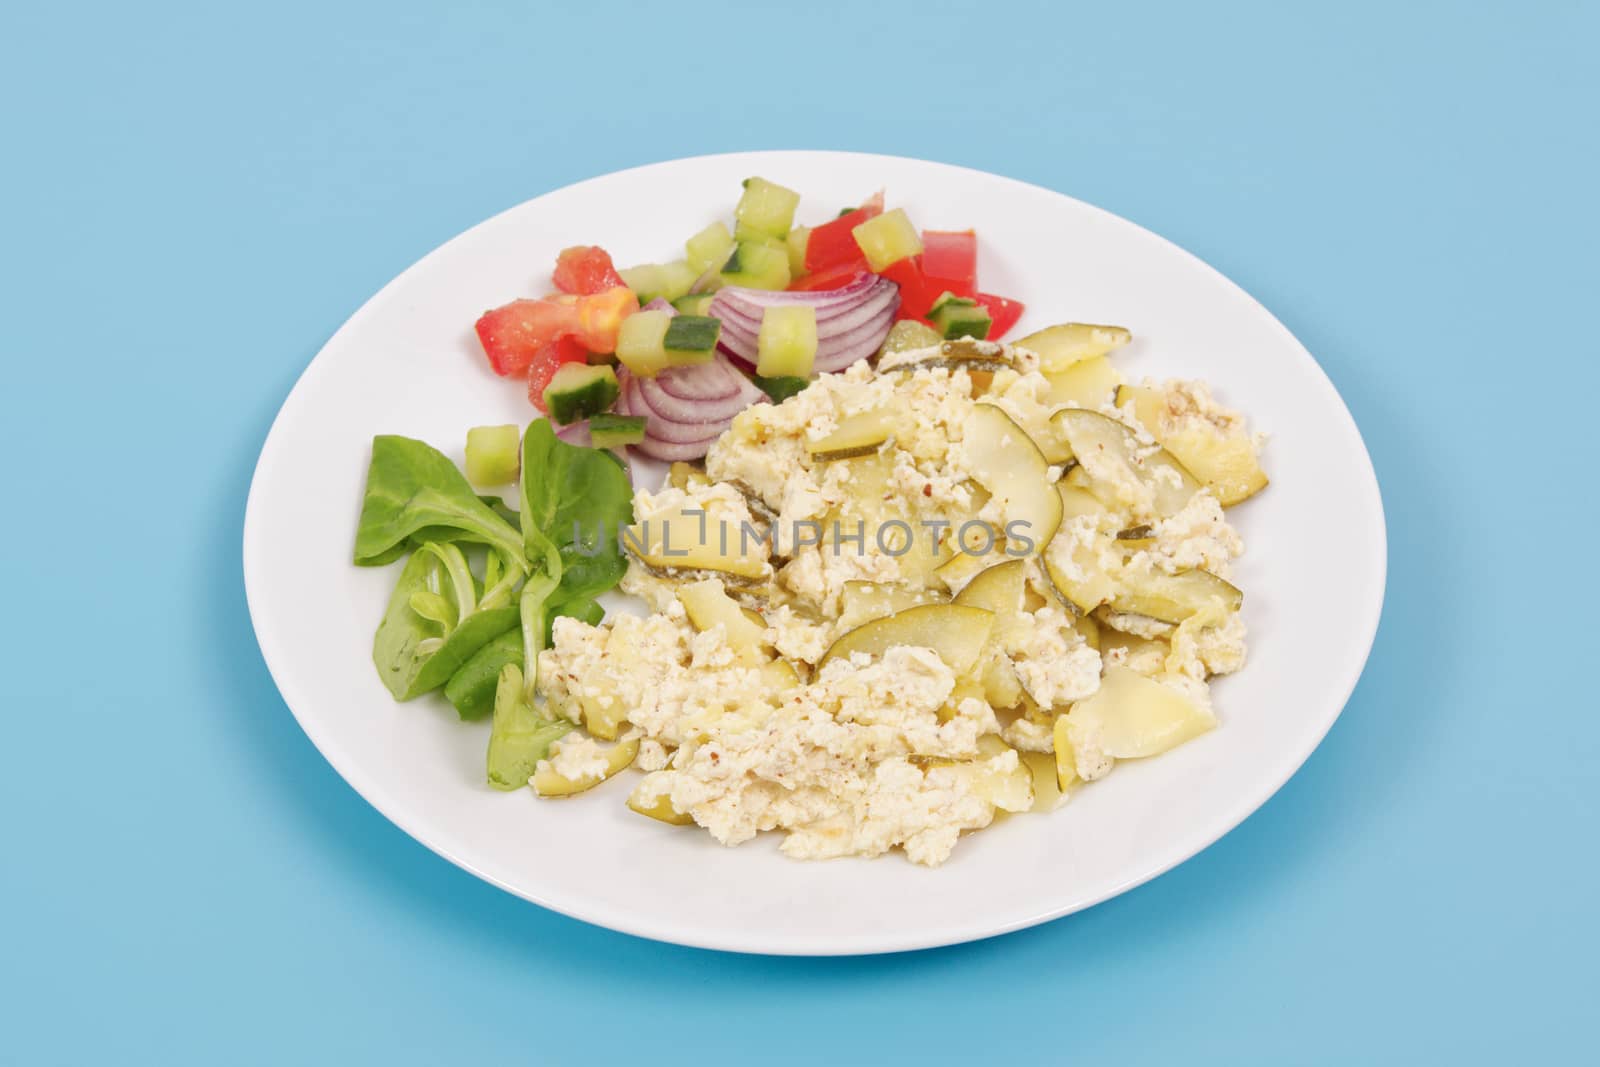 Baked zucchini vegetable salad on a white background